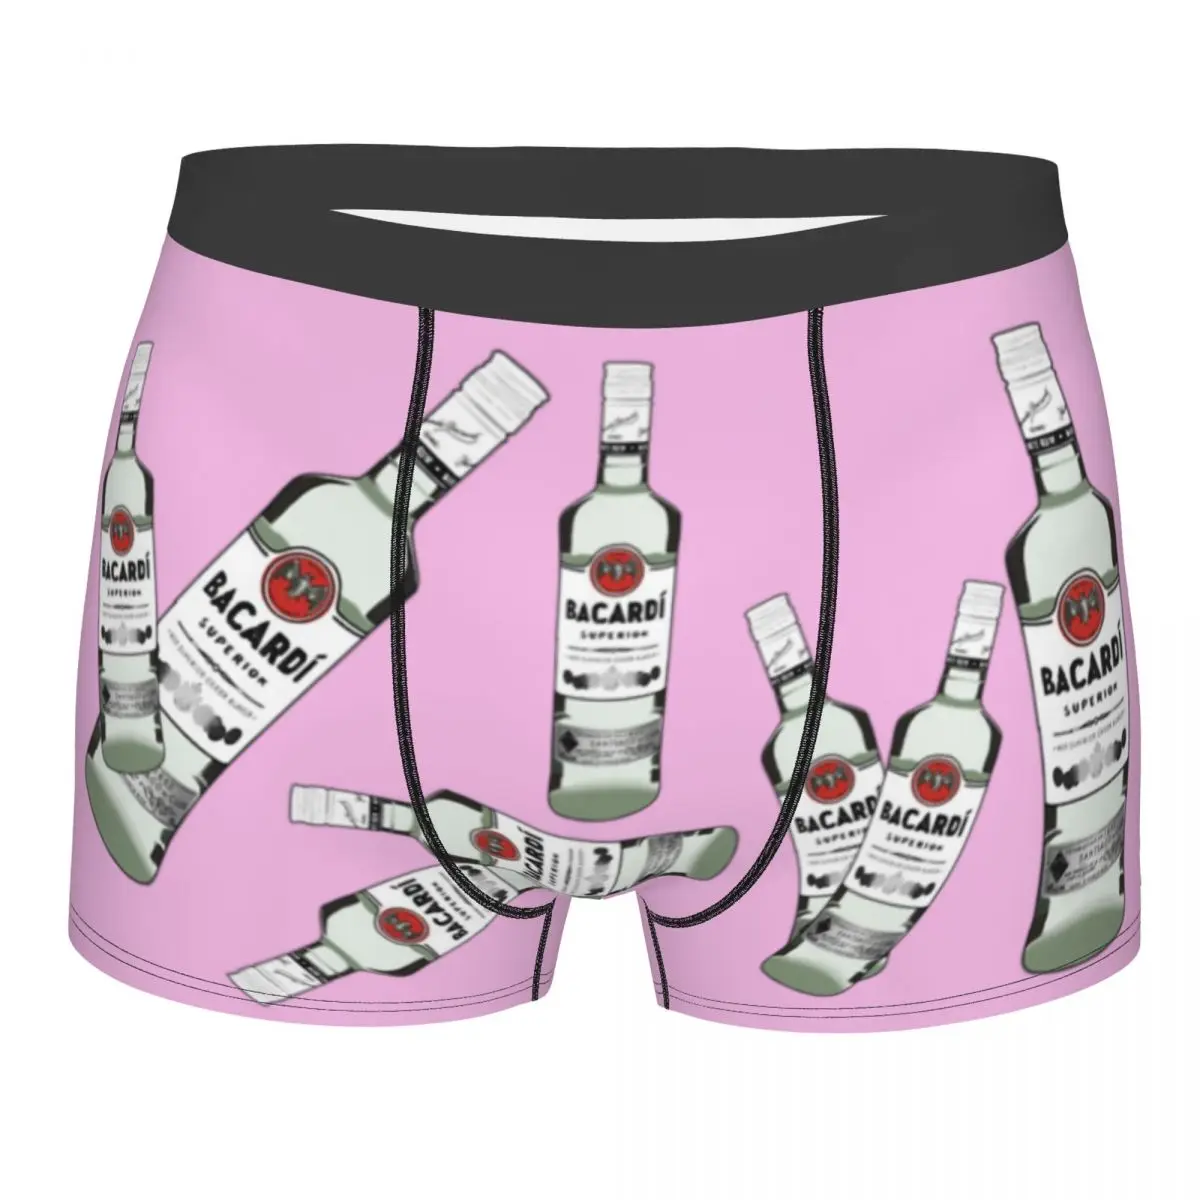 Bacardi Man's Boxer Briefs Underwear Bacardi Highly Breathable High Quality Birthday Gifts